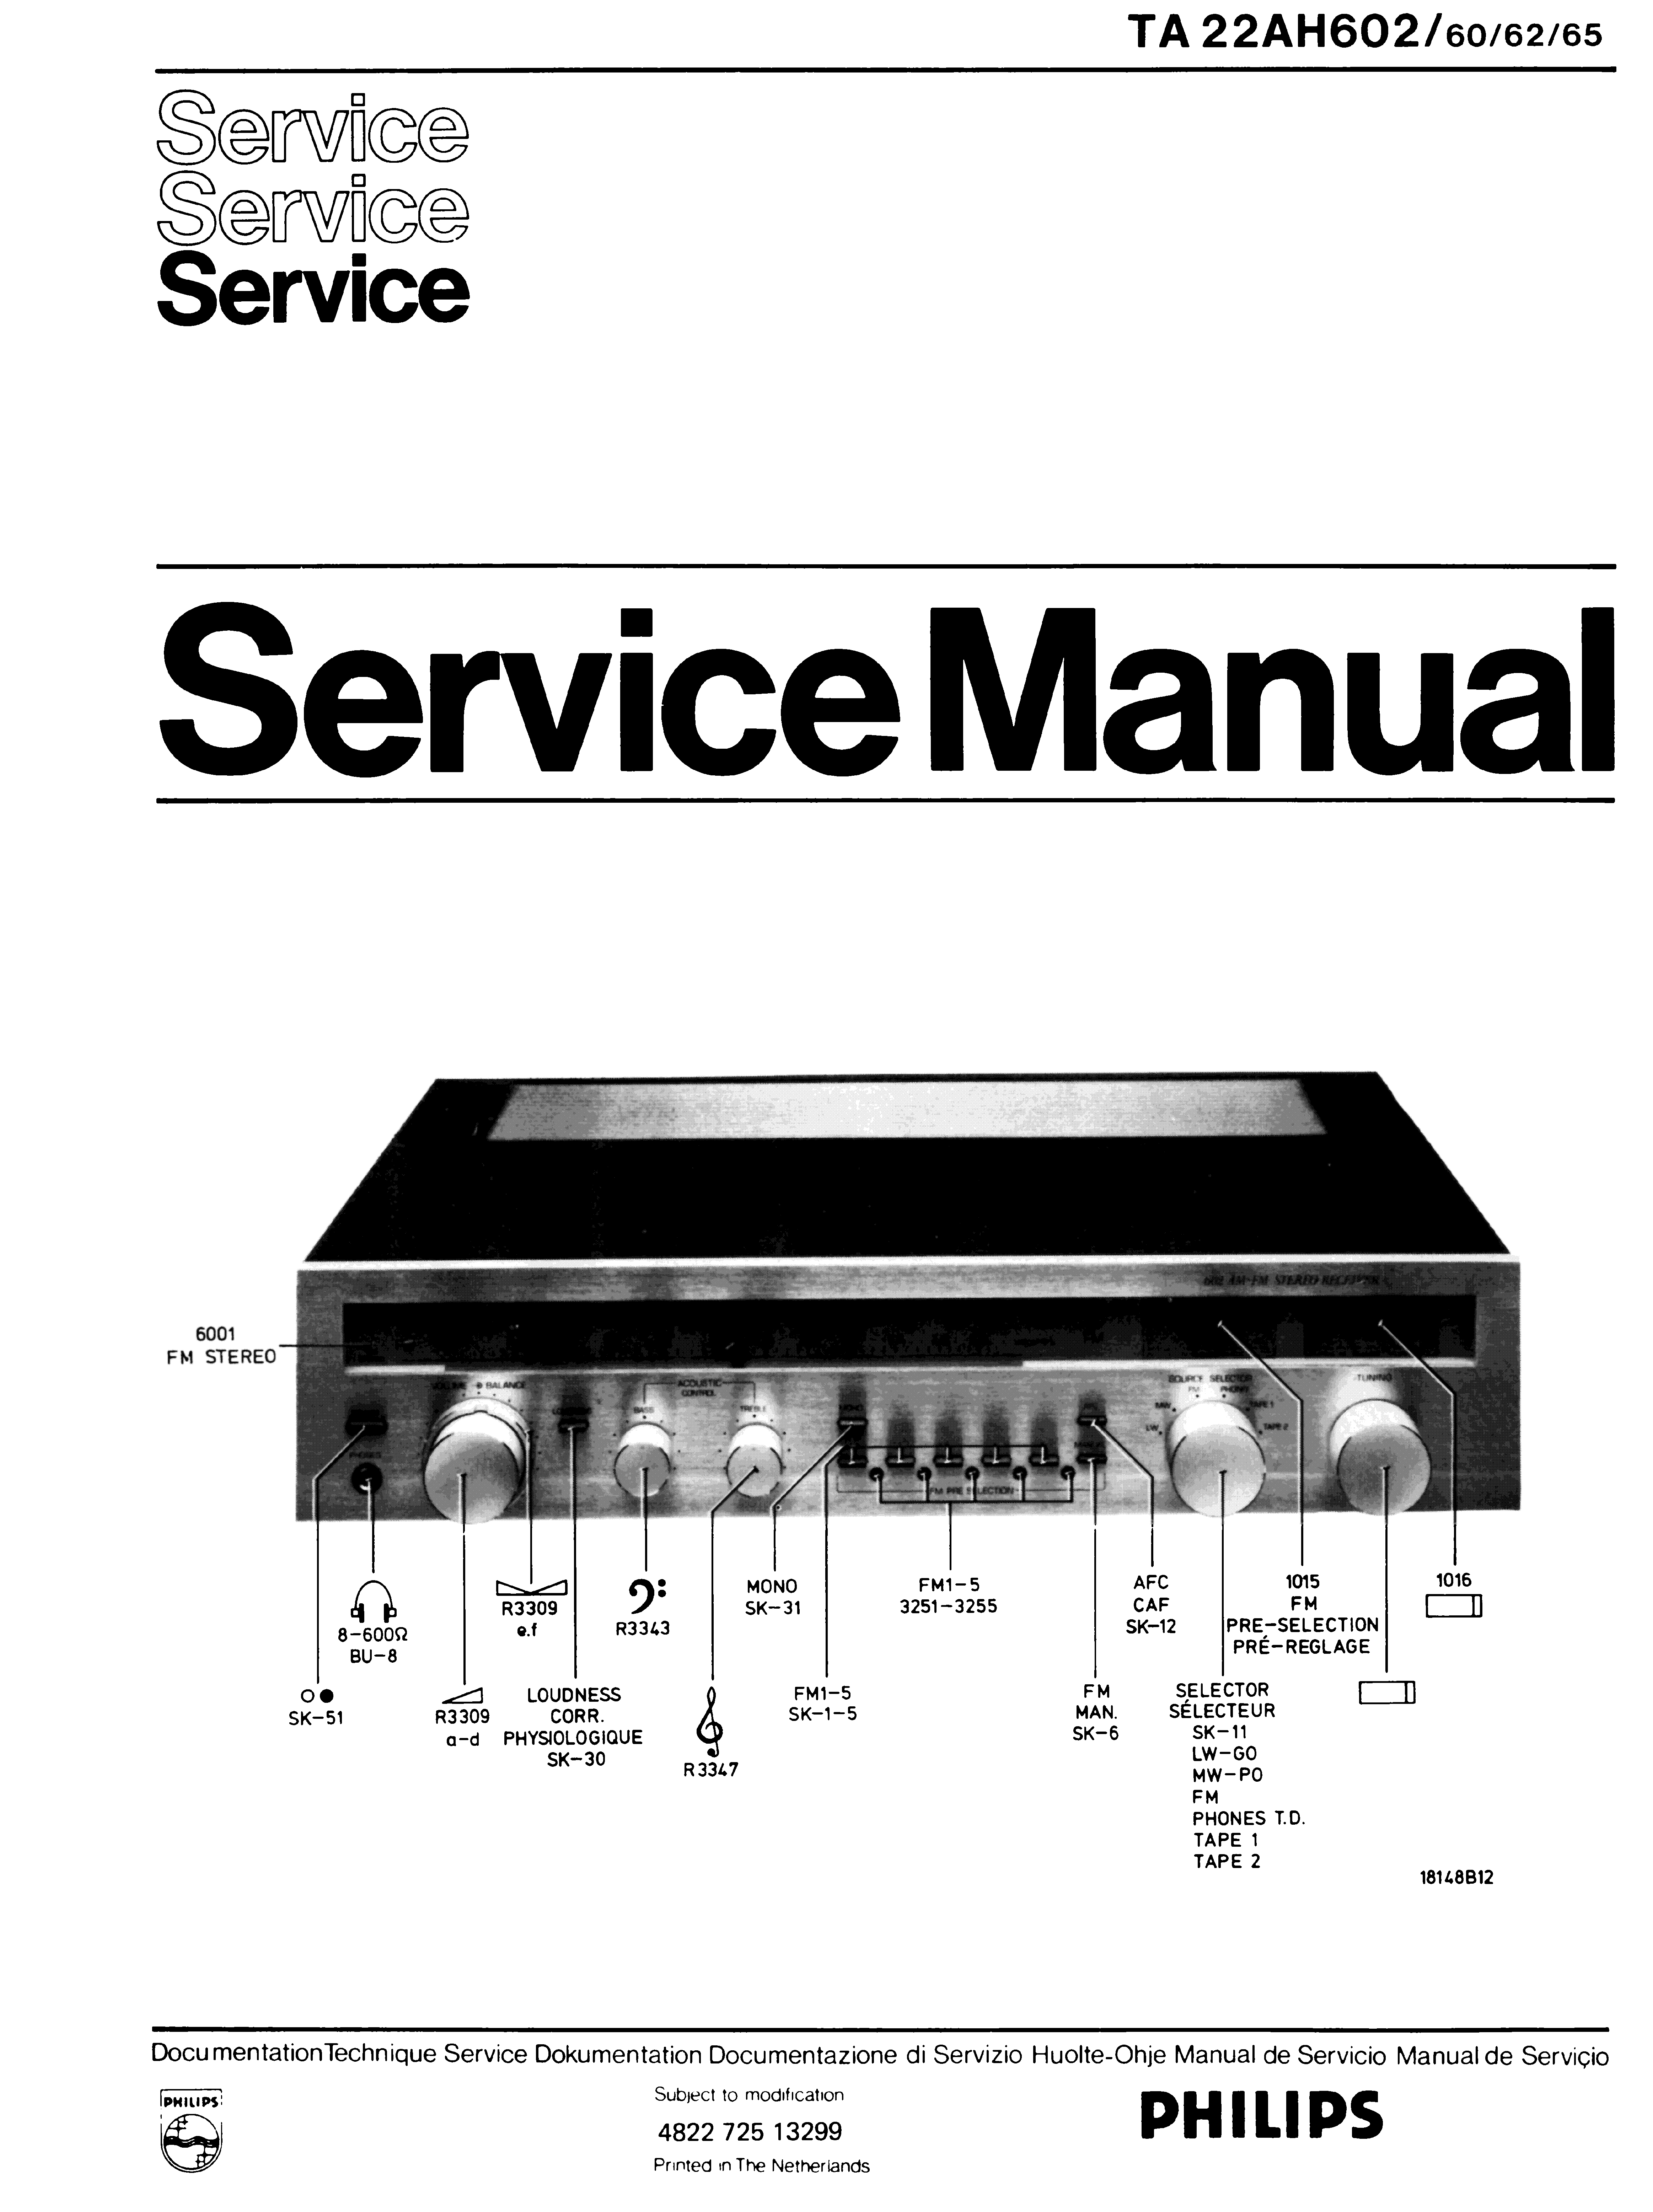 PHILIPS 22AH602 SM service manual (1st page)